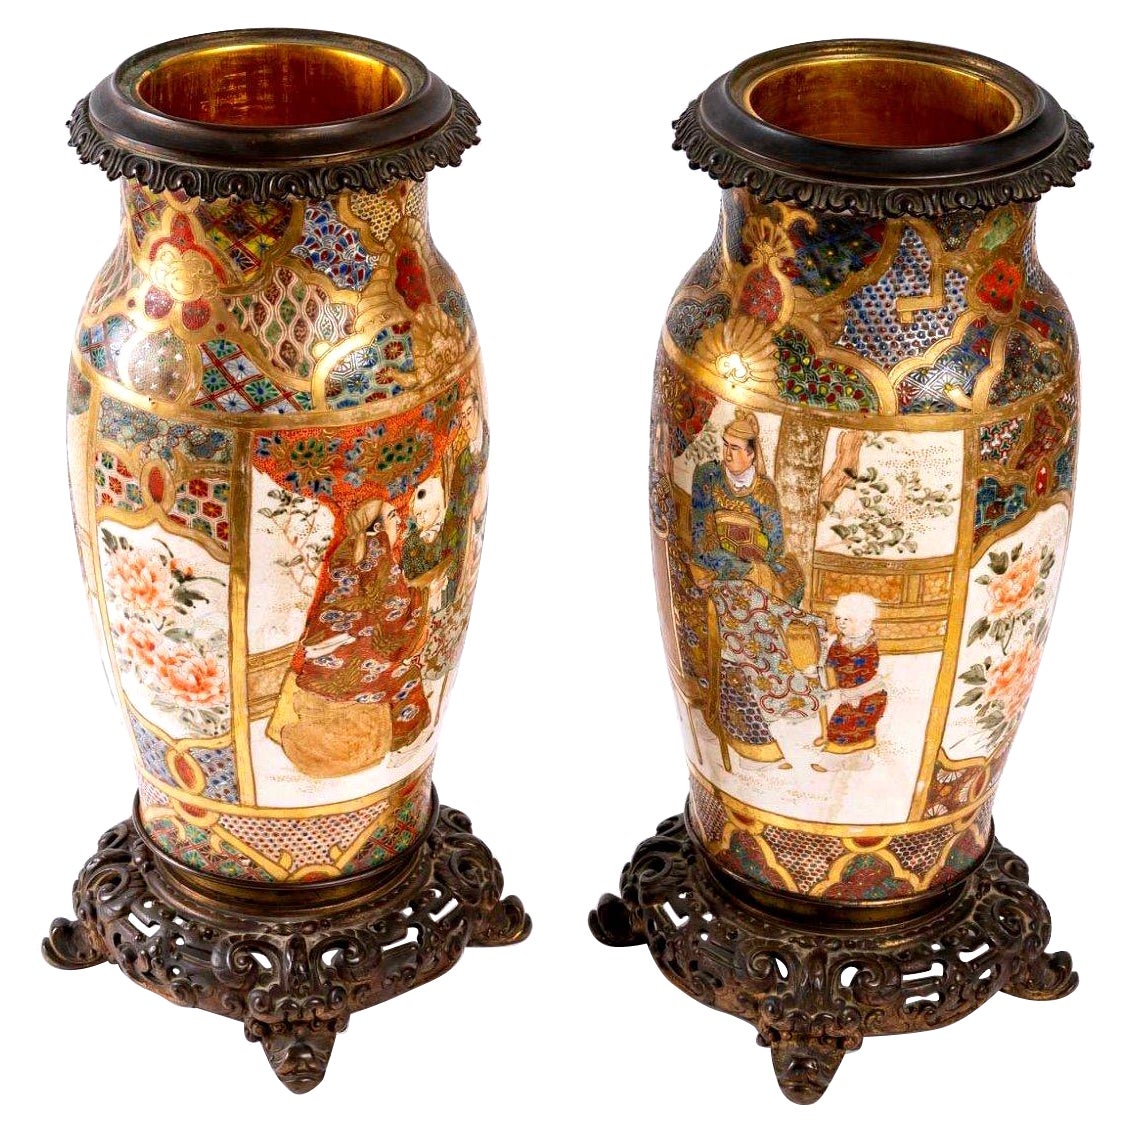 Pair of Satsuma Ceramic Vases Mounted on French Bronze, Period: Meiji, 19th For Sale